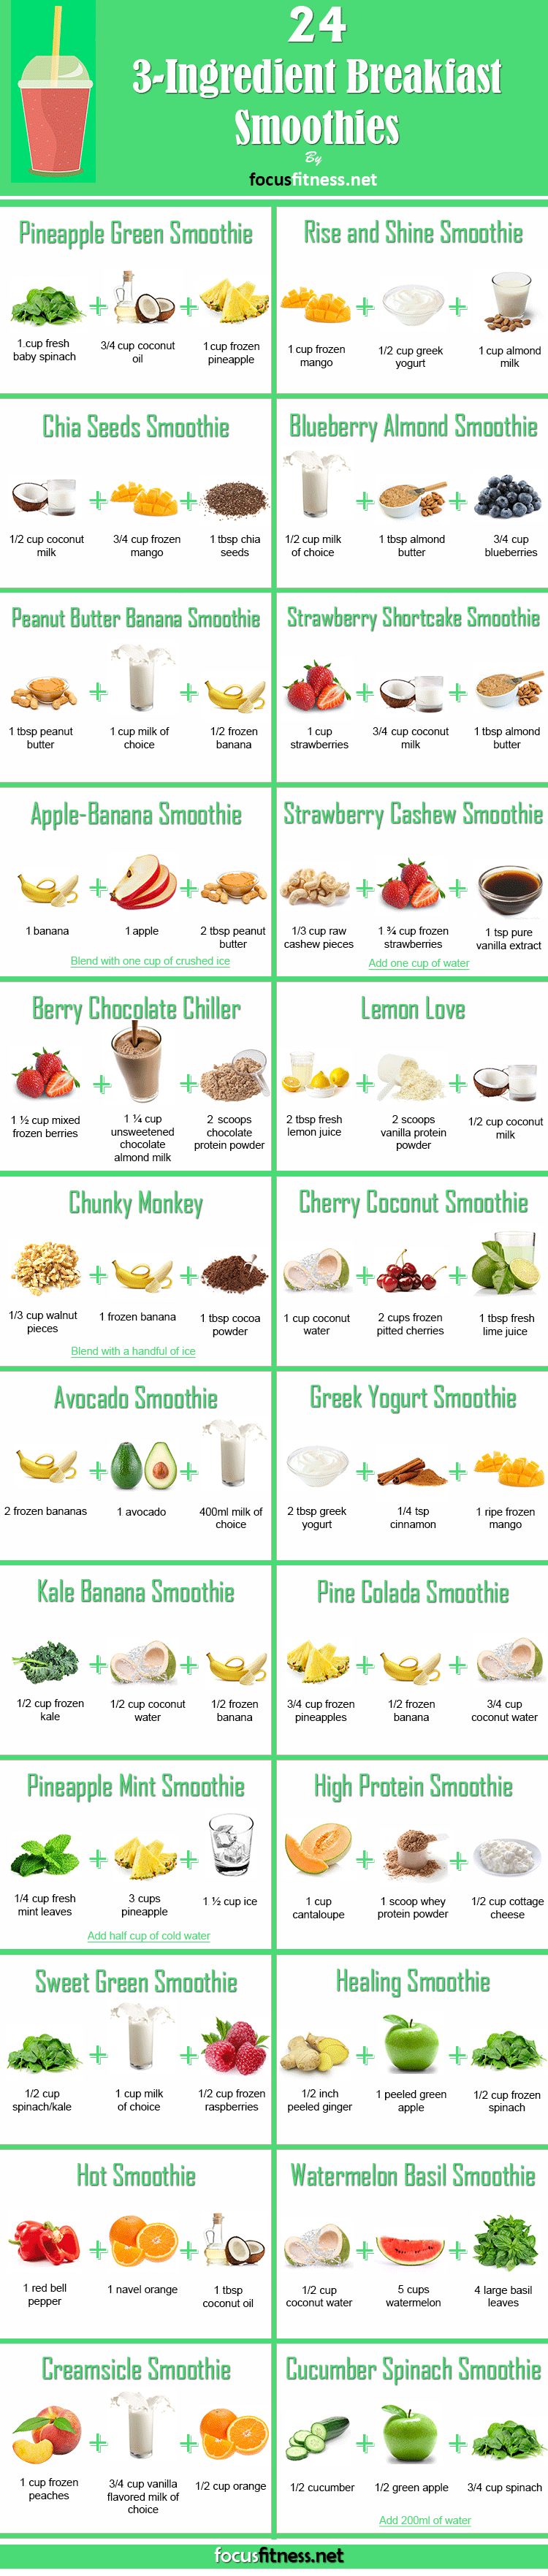 3-Ingredient Breakfast Smoothies To Supercharge Your Mornings Infographic